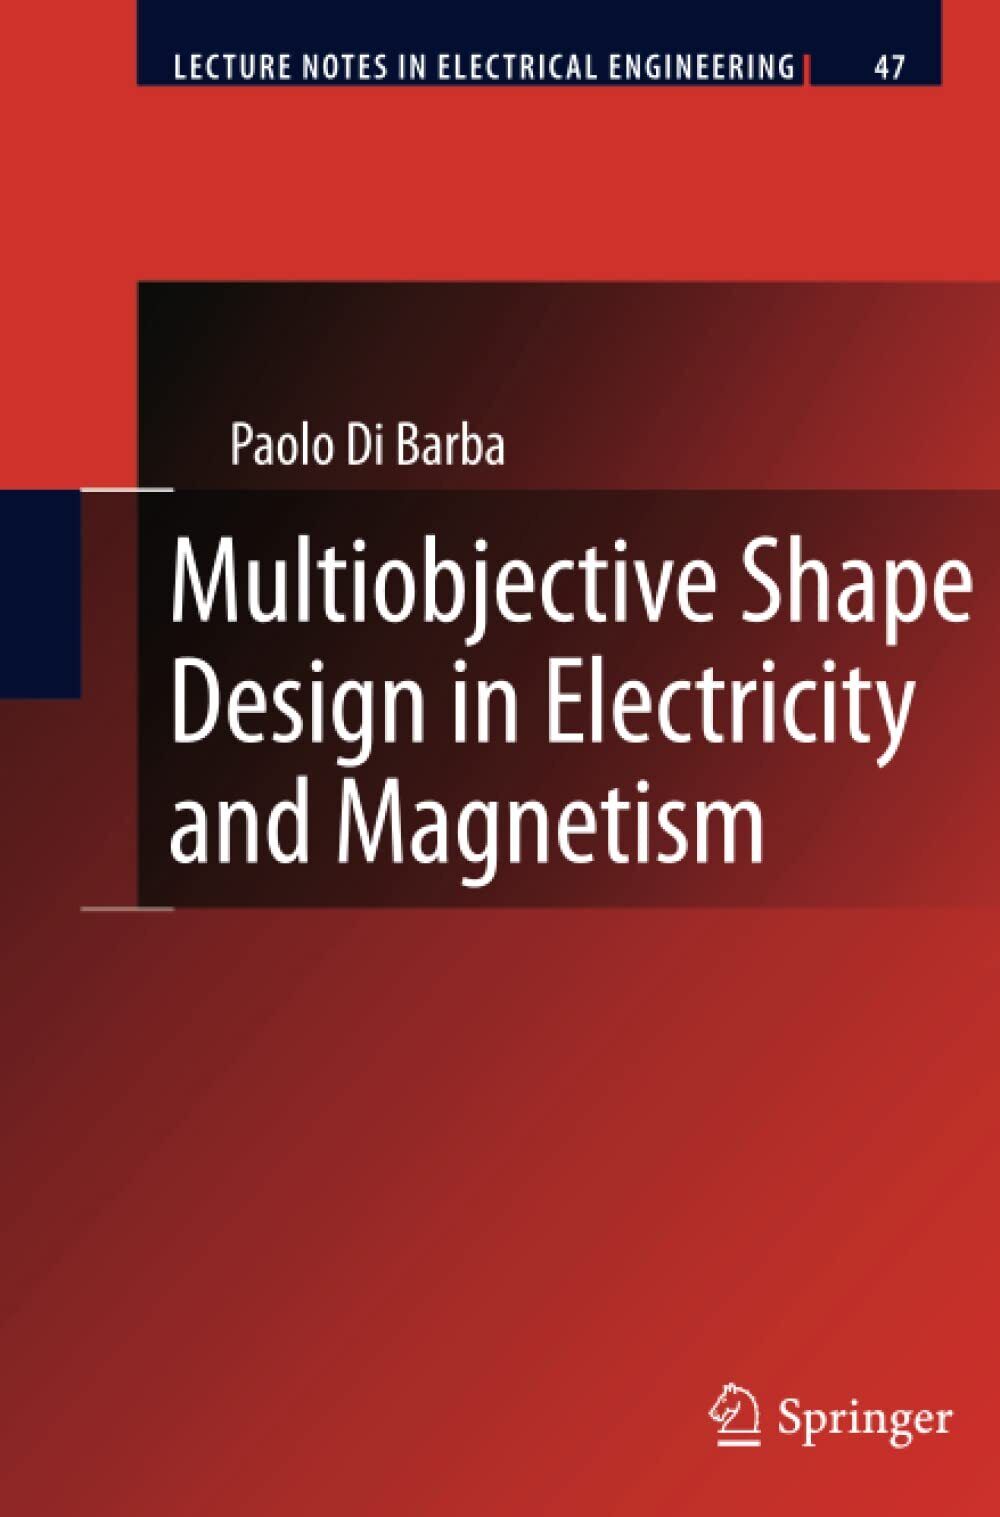 Multiobjective Shape Design in Electricity and Magnetism - Paolo Di Barba - 2012 libro usato